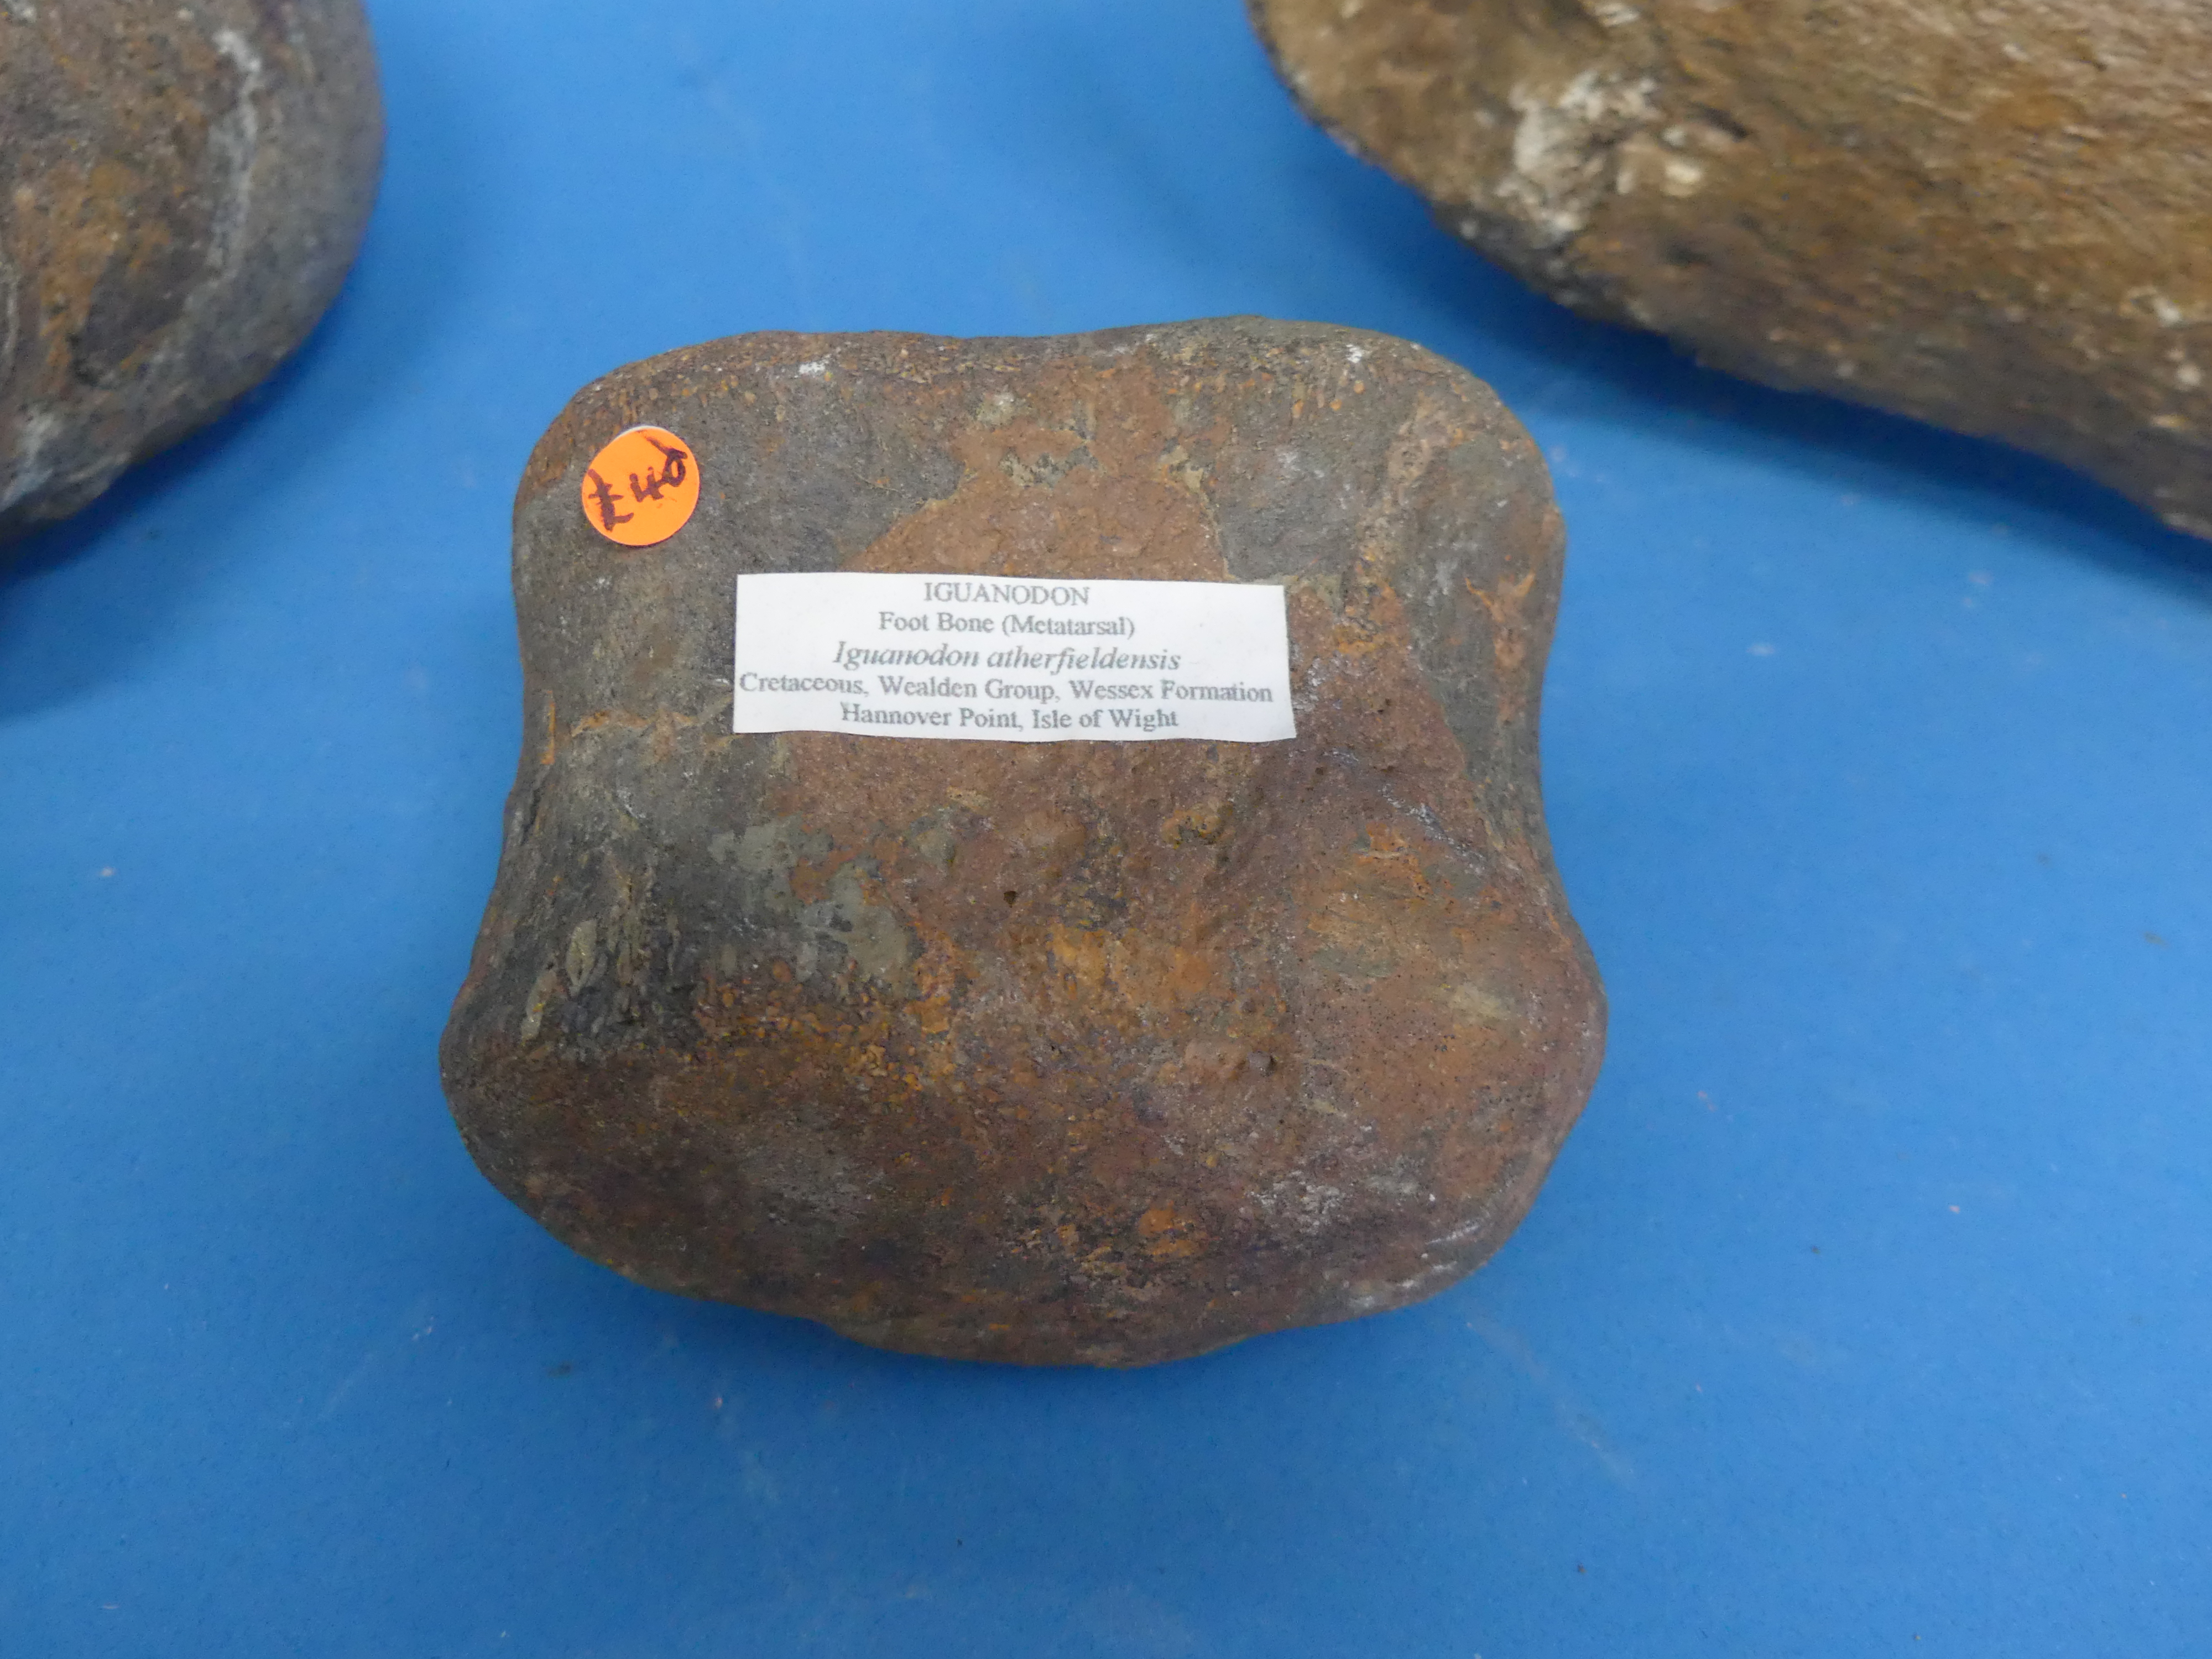 Natural History, Paleontology and Minerals; Two Iguanodon Bone Fossil Specimens, Cretaceous - Image 4 of 8